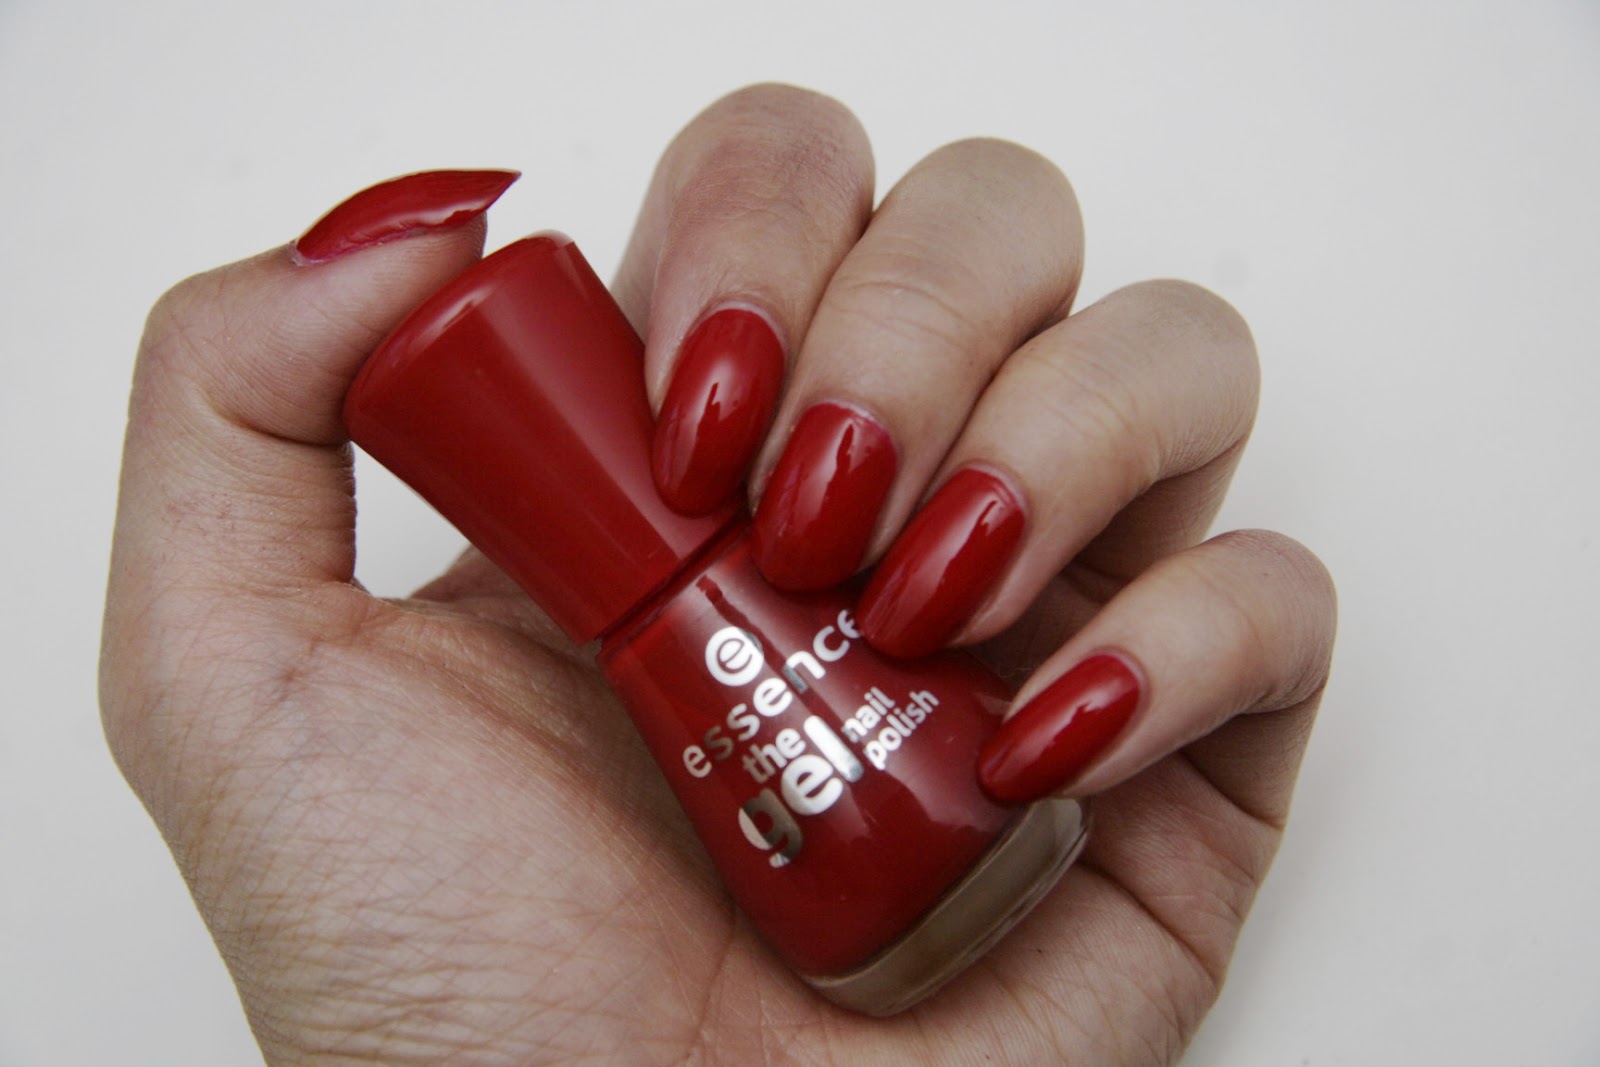 Essence Satin Nail Color - wide 5